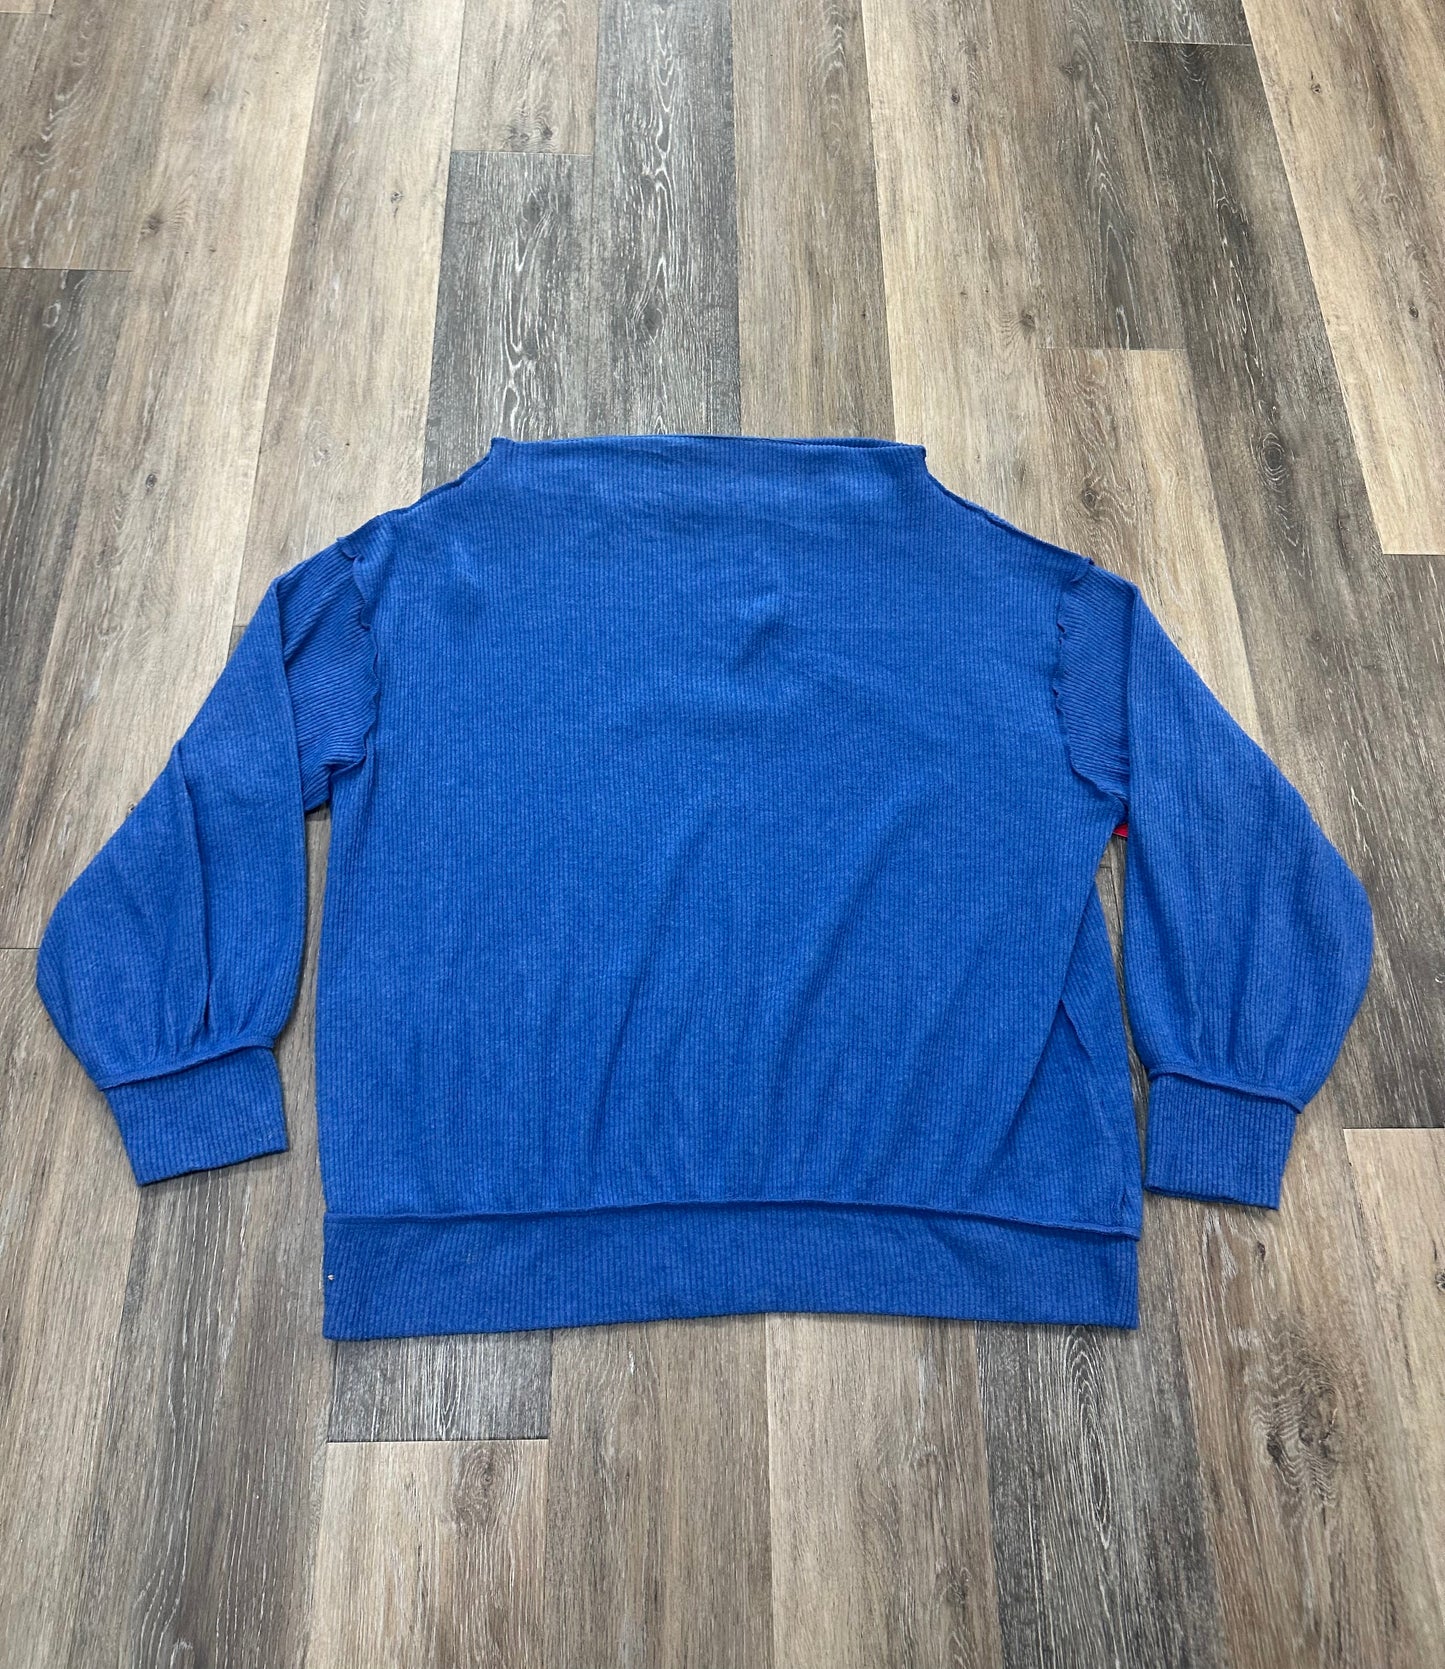 Blue Sweater We The Free, Size L